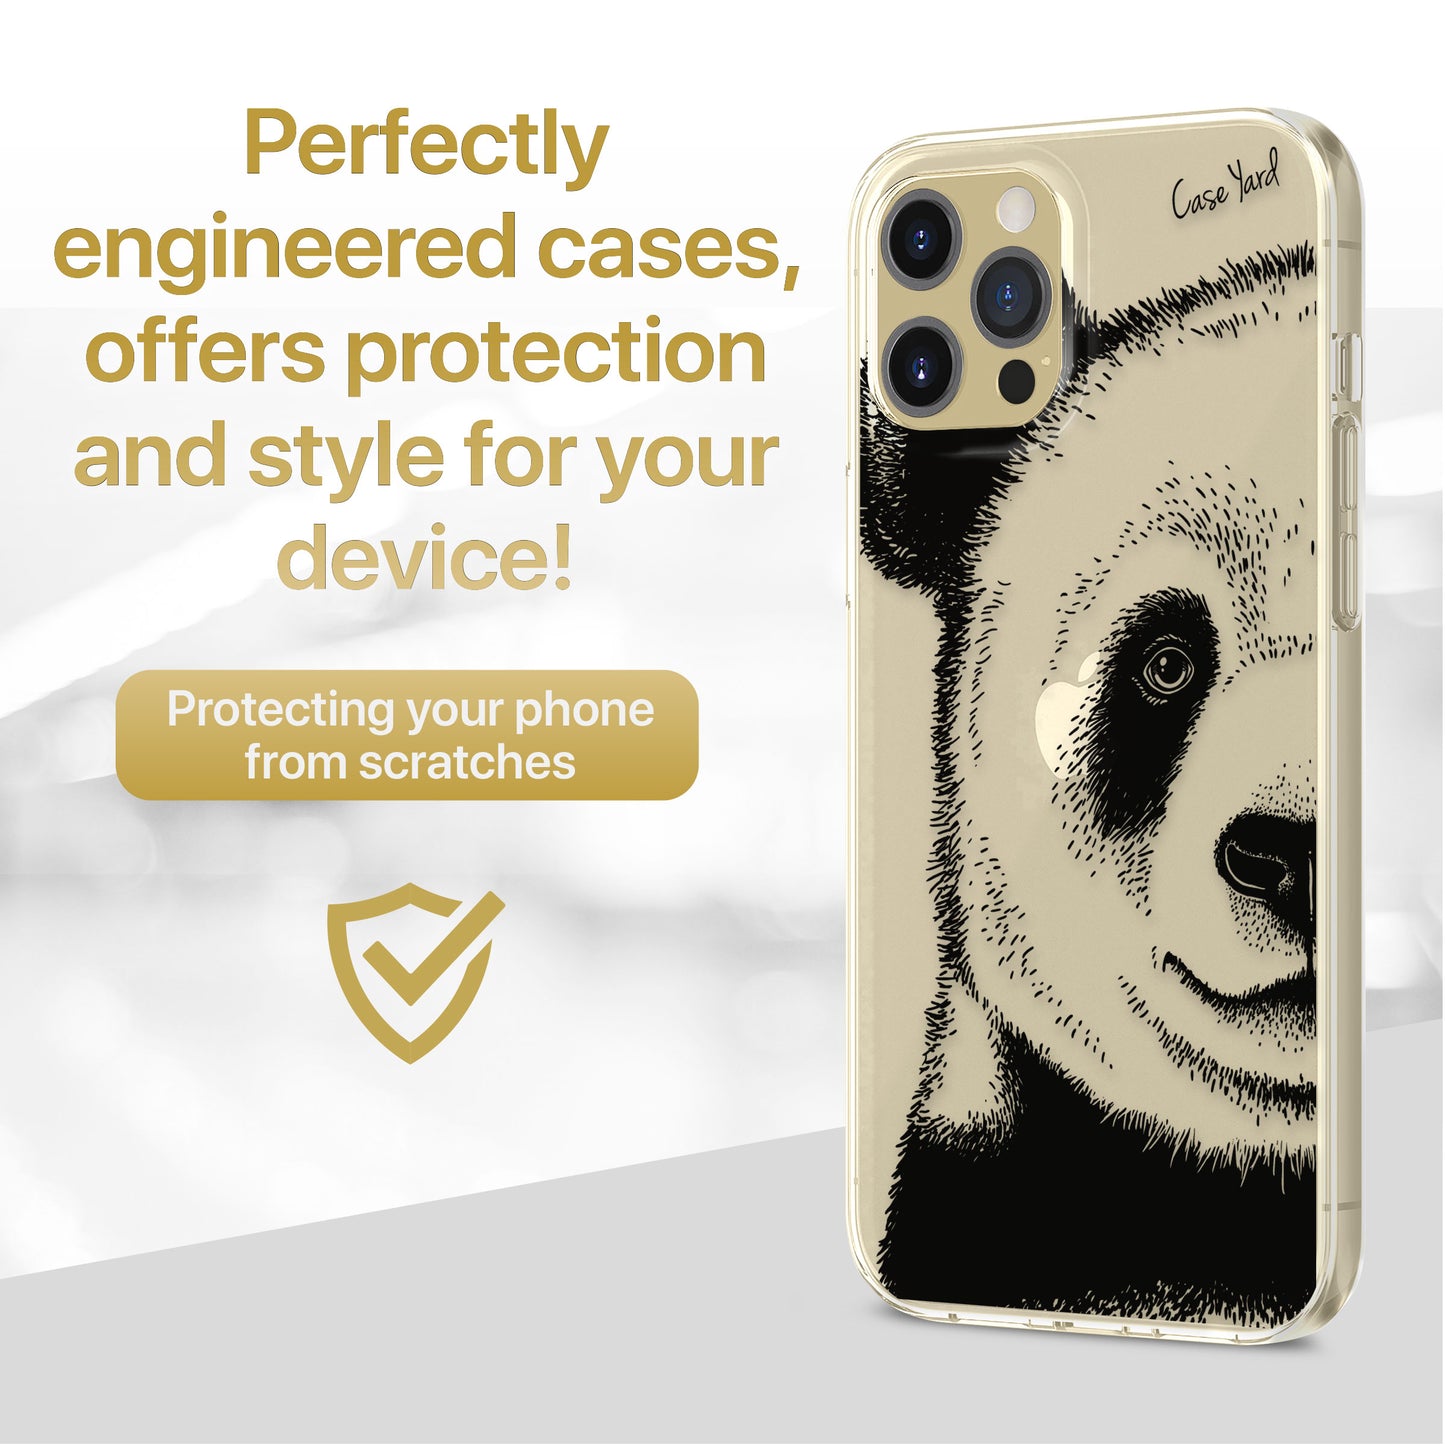 TPU Clear case with (Panda Face) Design for iPhone & Samsung Phones